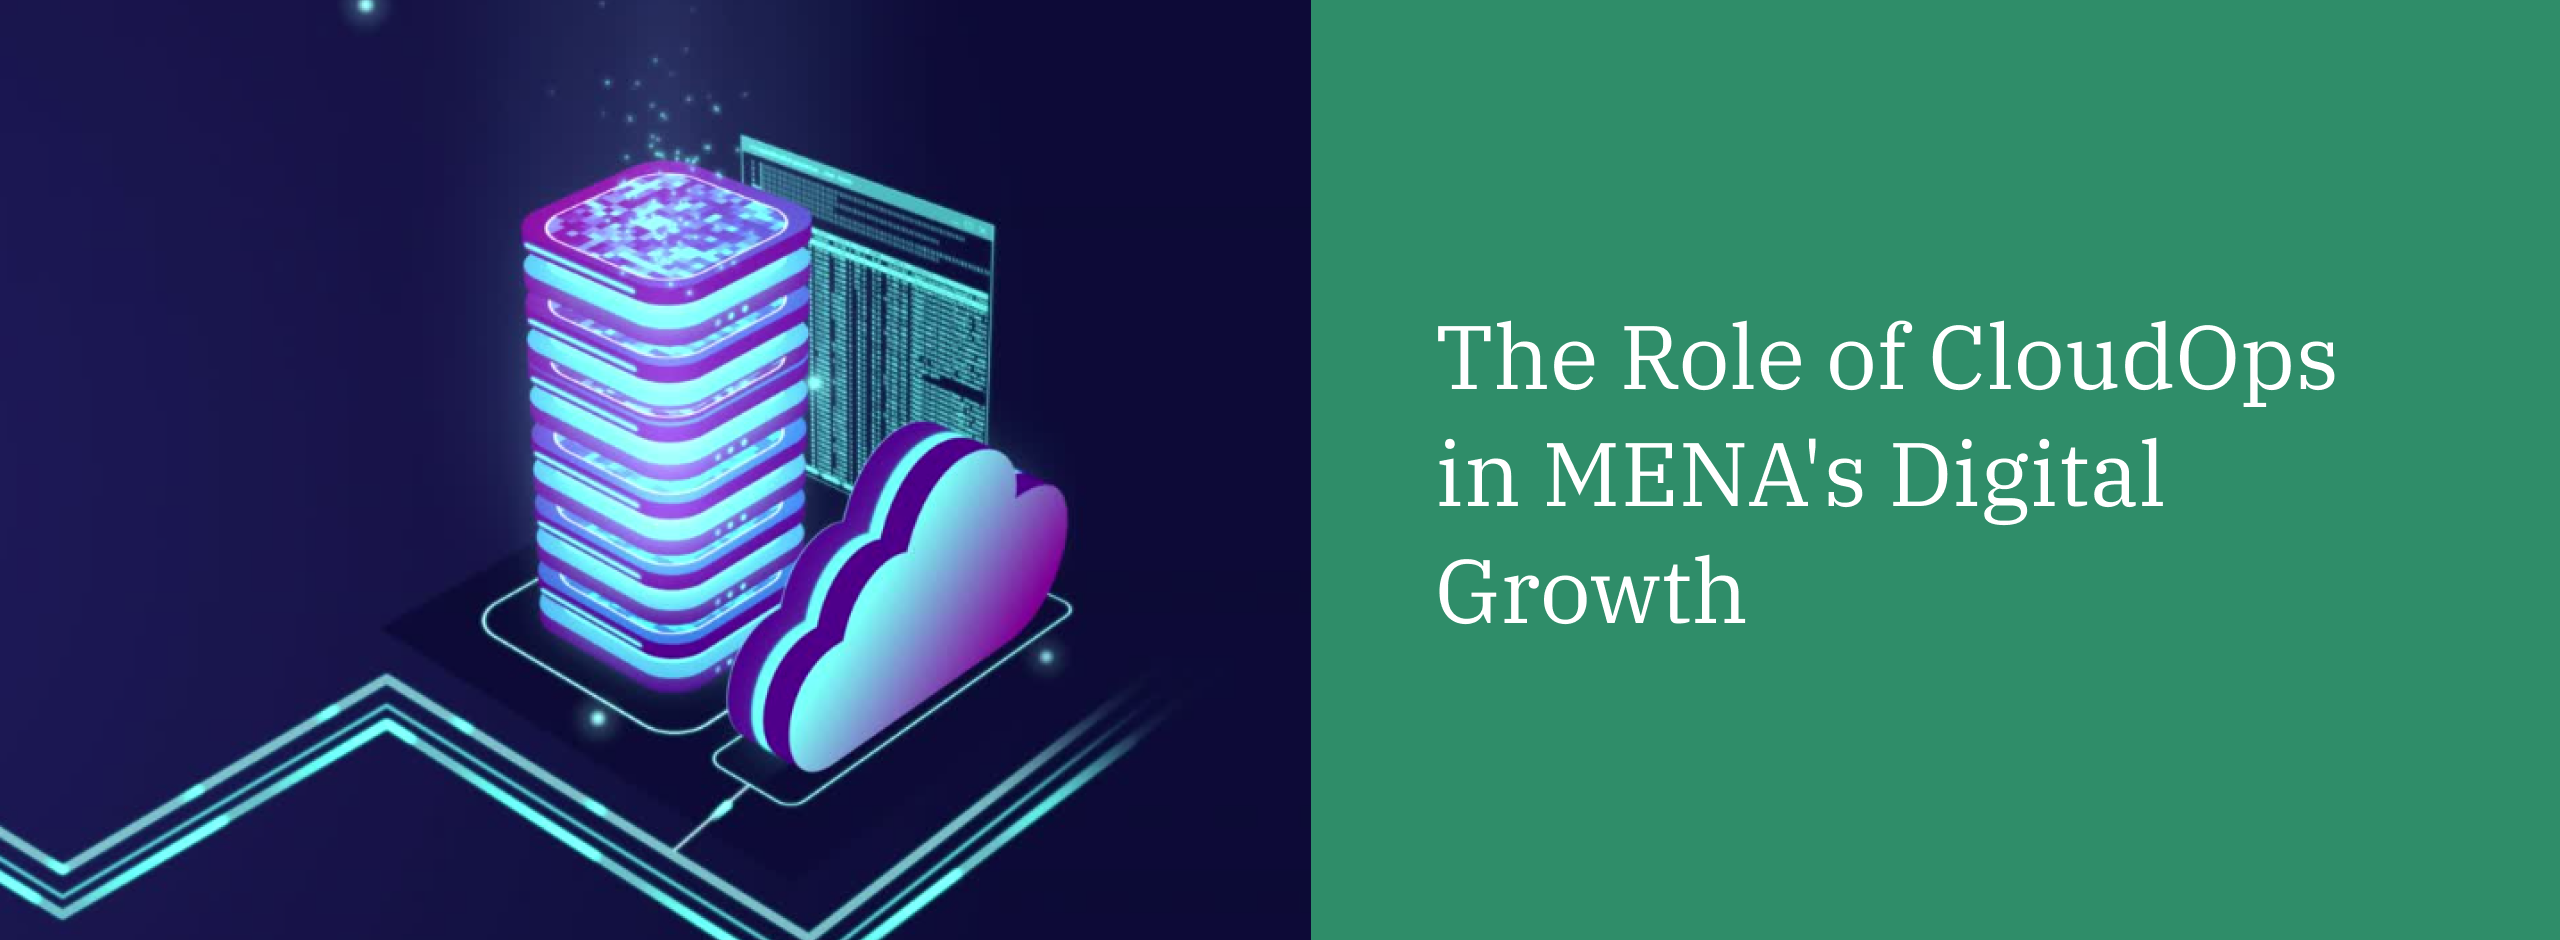 Article role-of-cloudops-in-mena